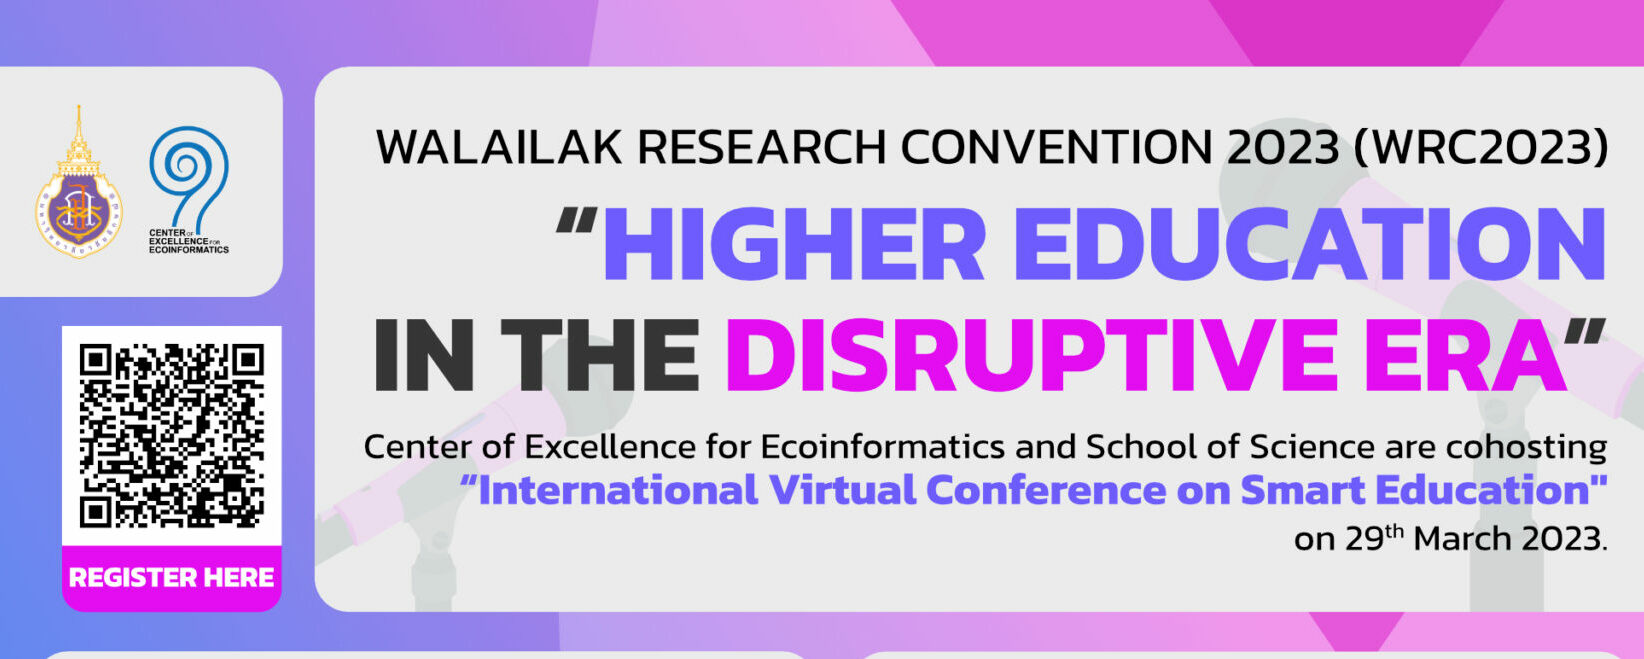 Center of Excellence for Ecoinformatics organize a webinar on the theme "International Virtual Conference on Smart Eduication" with 7 topics and 8 Keynote speakers.